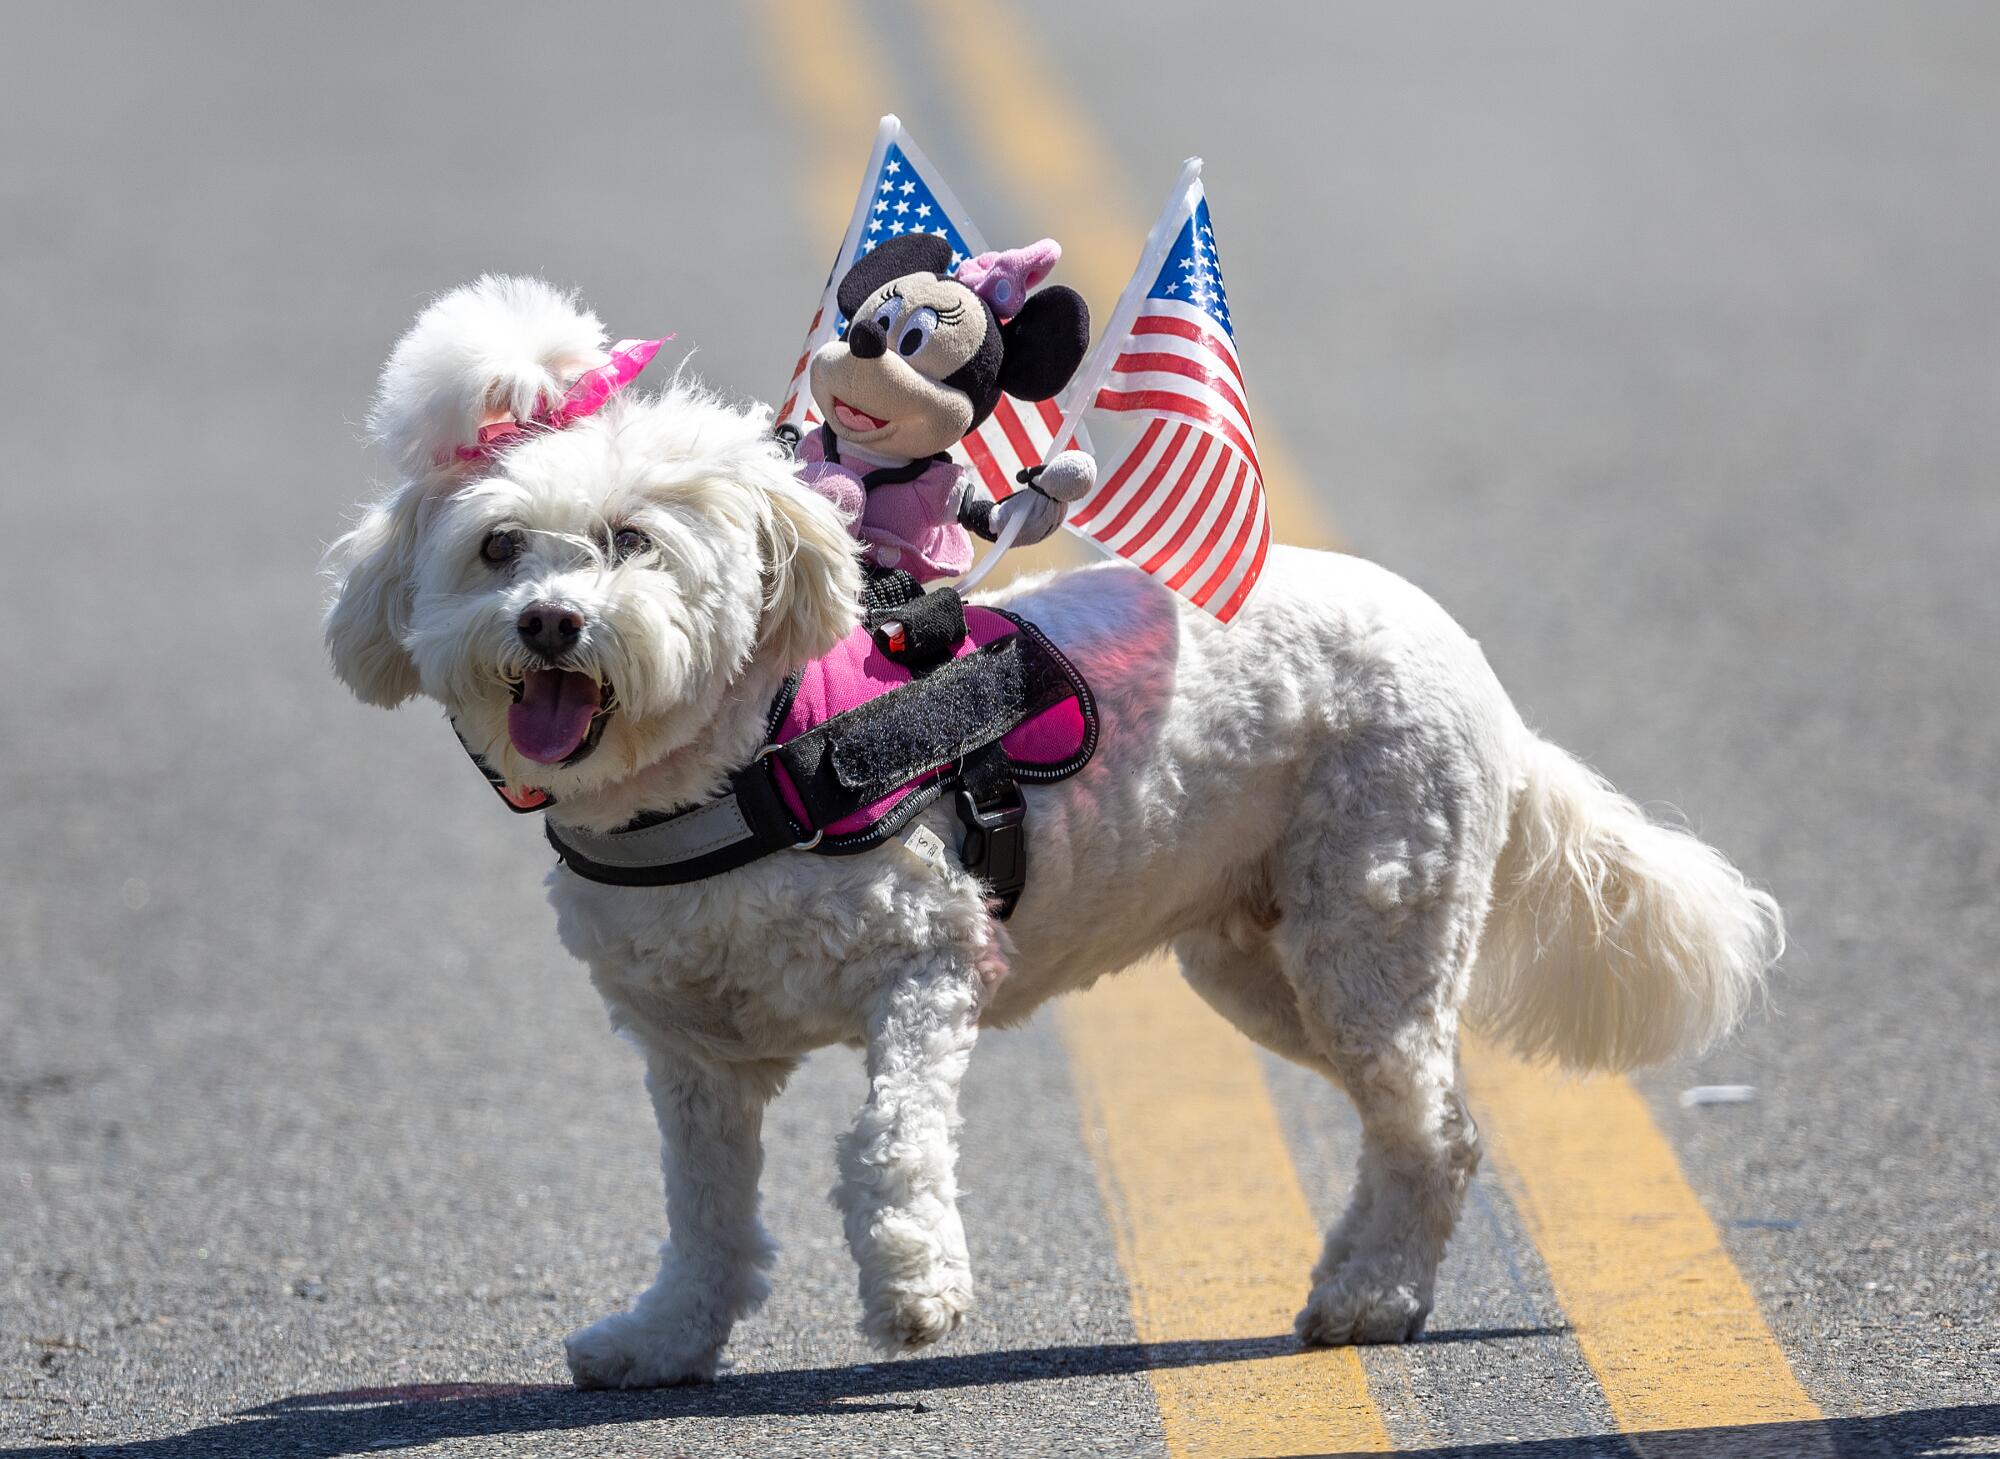 A dog sports a Minnie Mouse doll holding American flags.